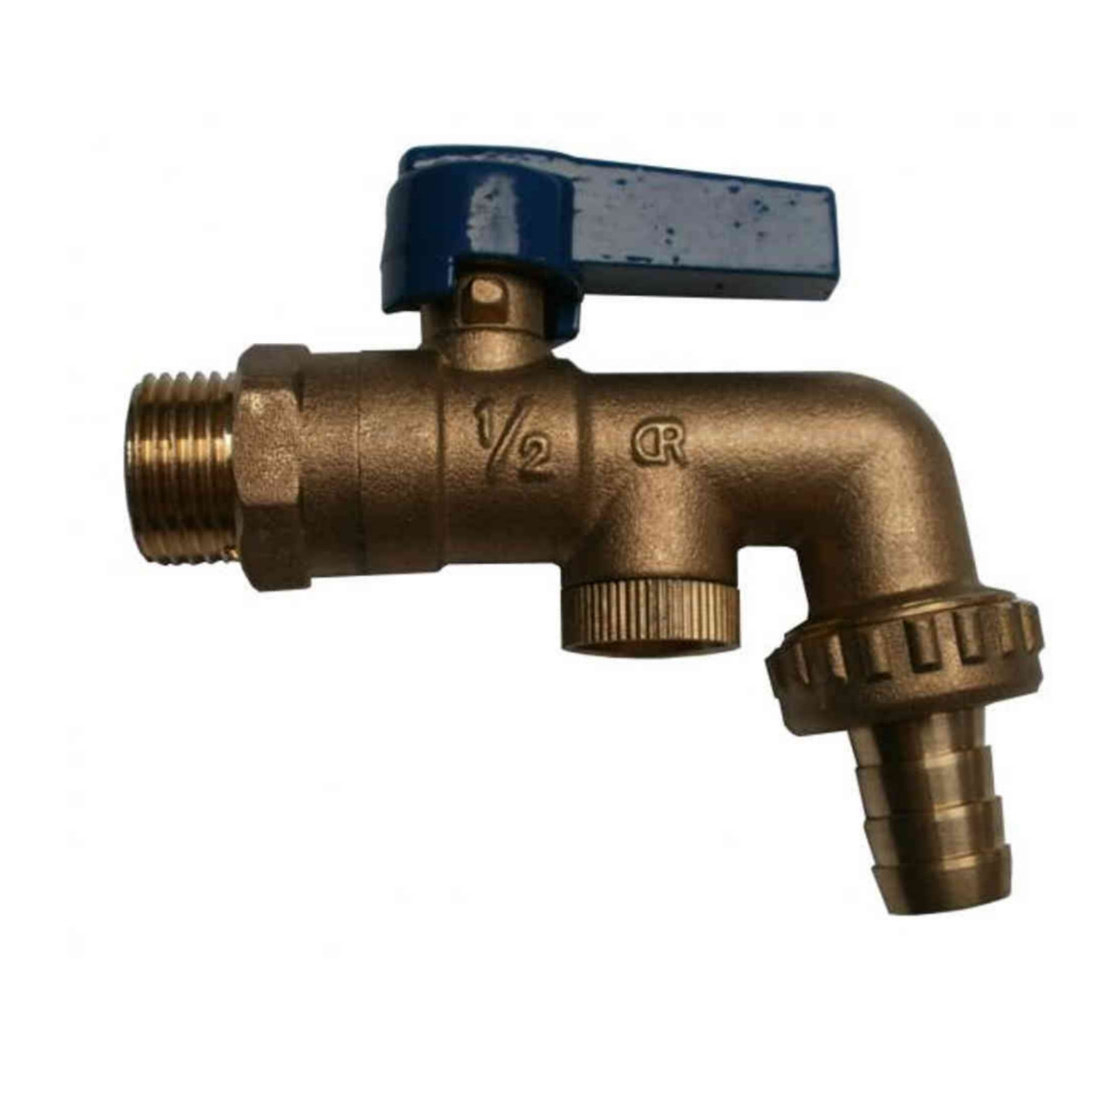 1/2" Lever Outside Tap With Double Check Valve (Blue Handle